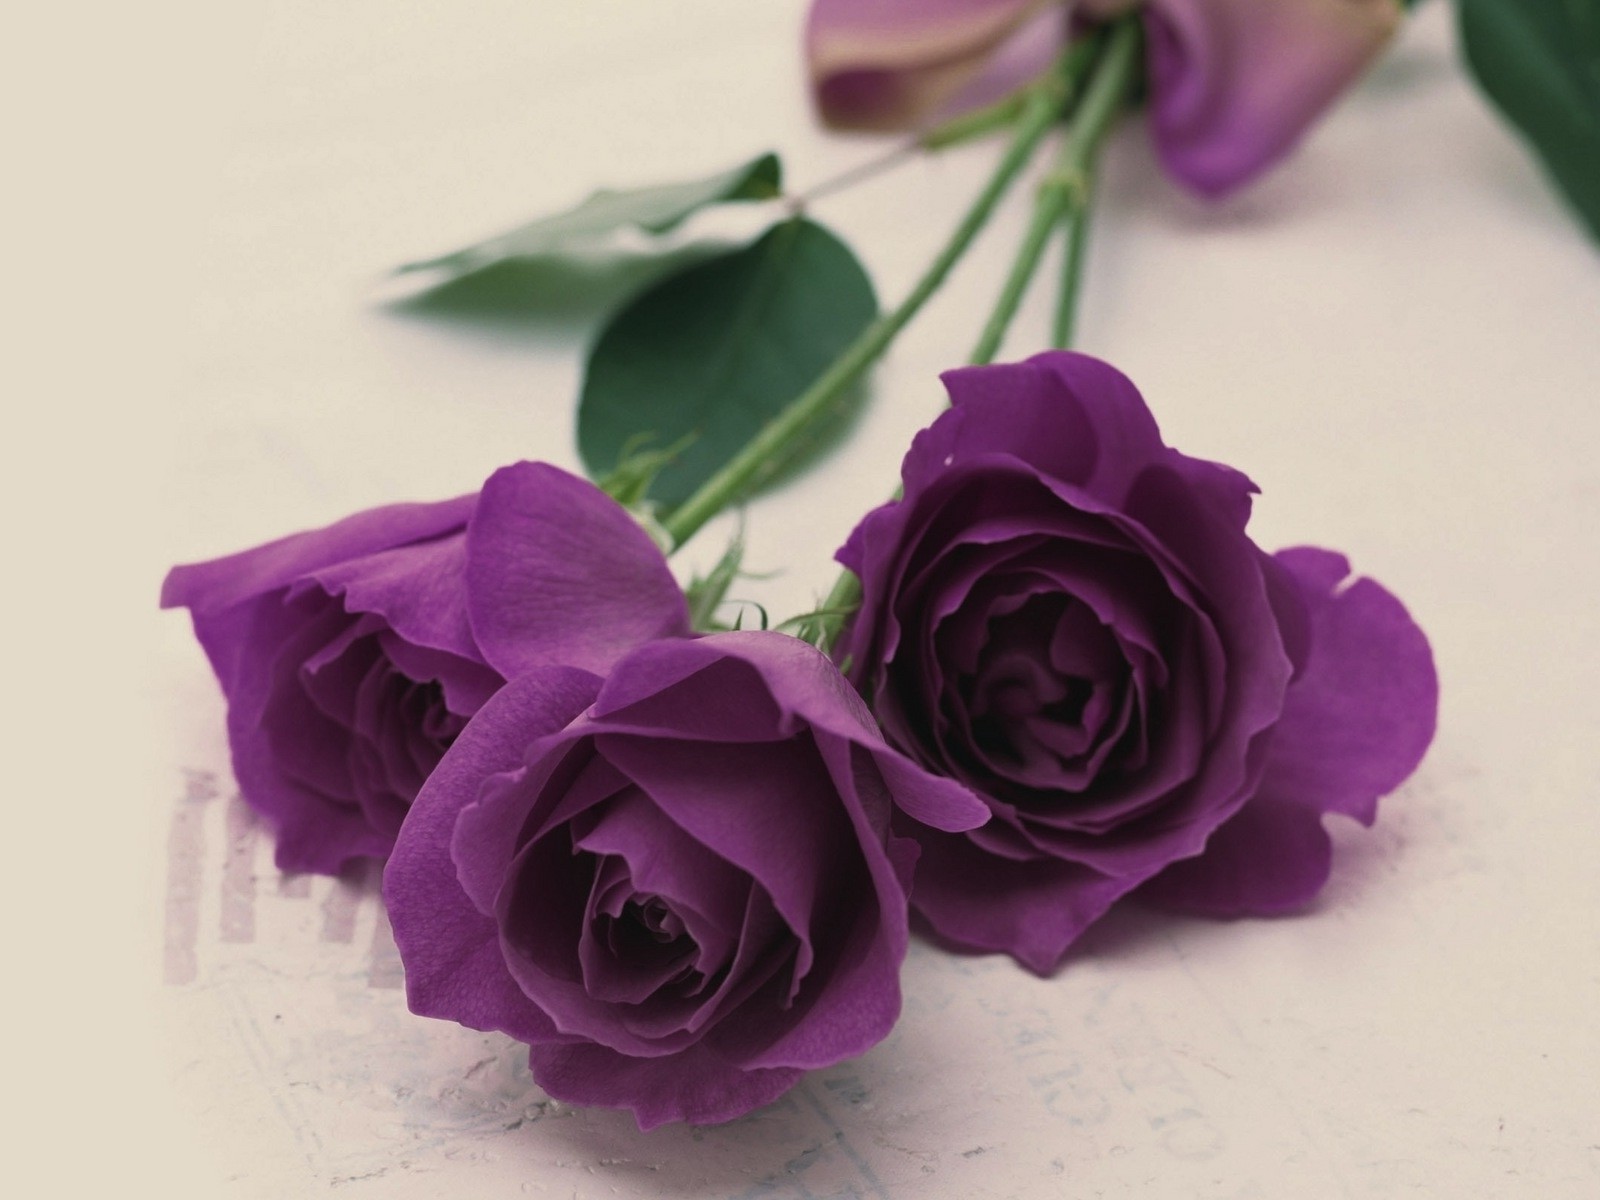 Lavender Roses - Wallpaper, High Definition, High Quality, Widescreen